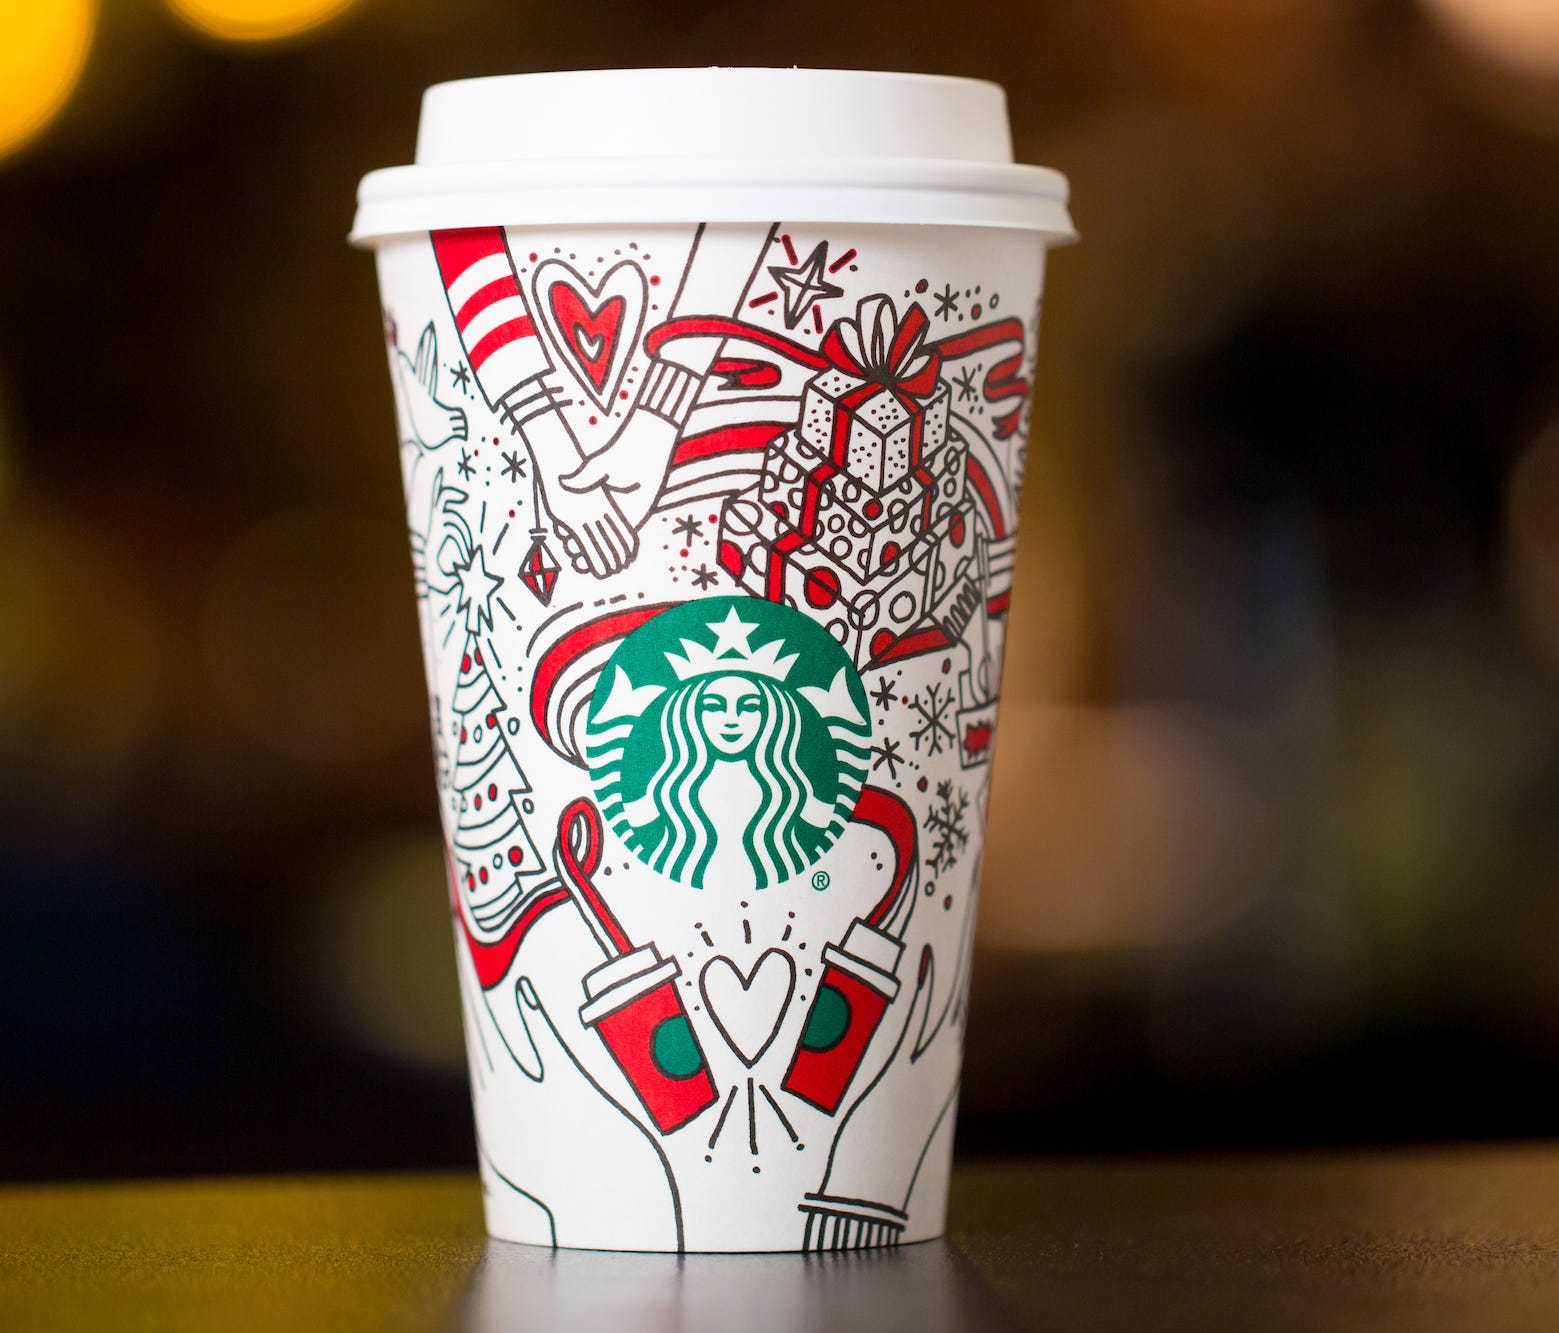 Starbucks 2017 holiday cups photographed on Monday, Oct. 23.